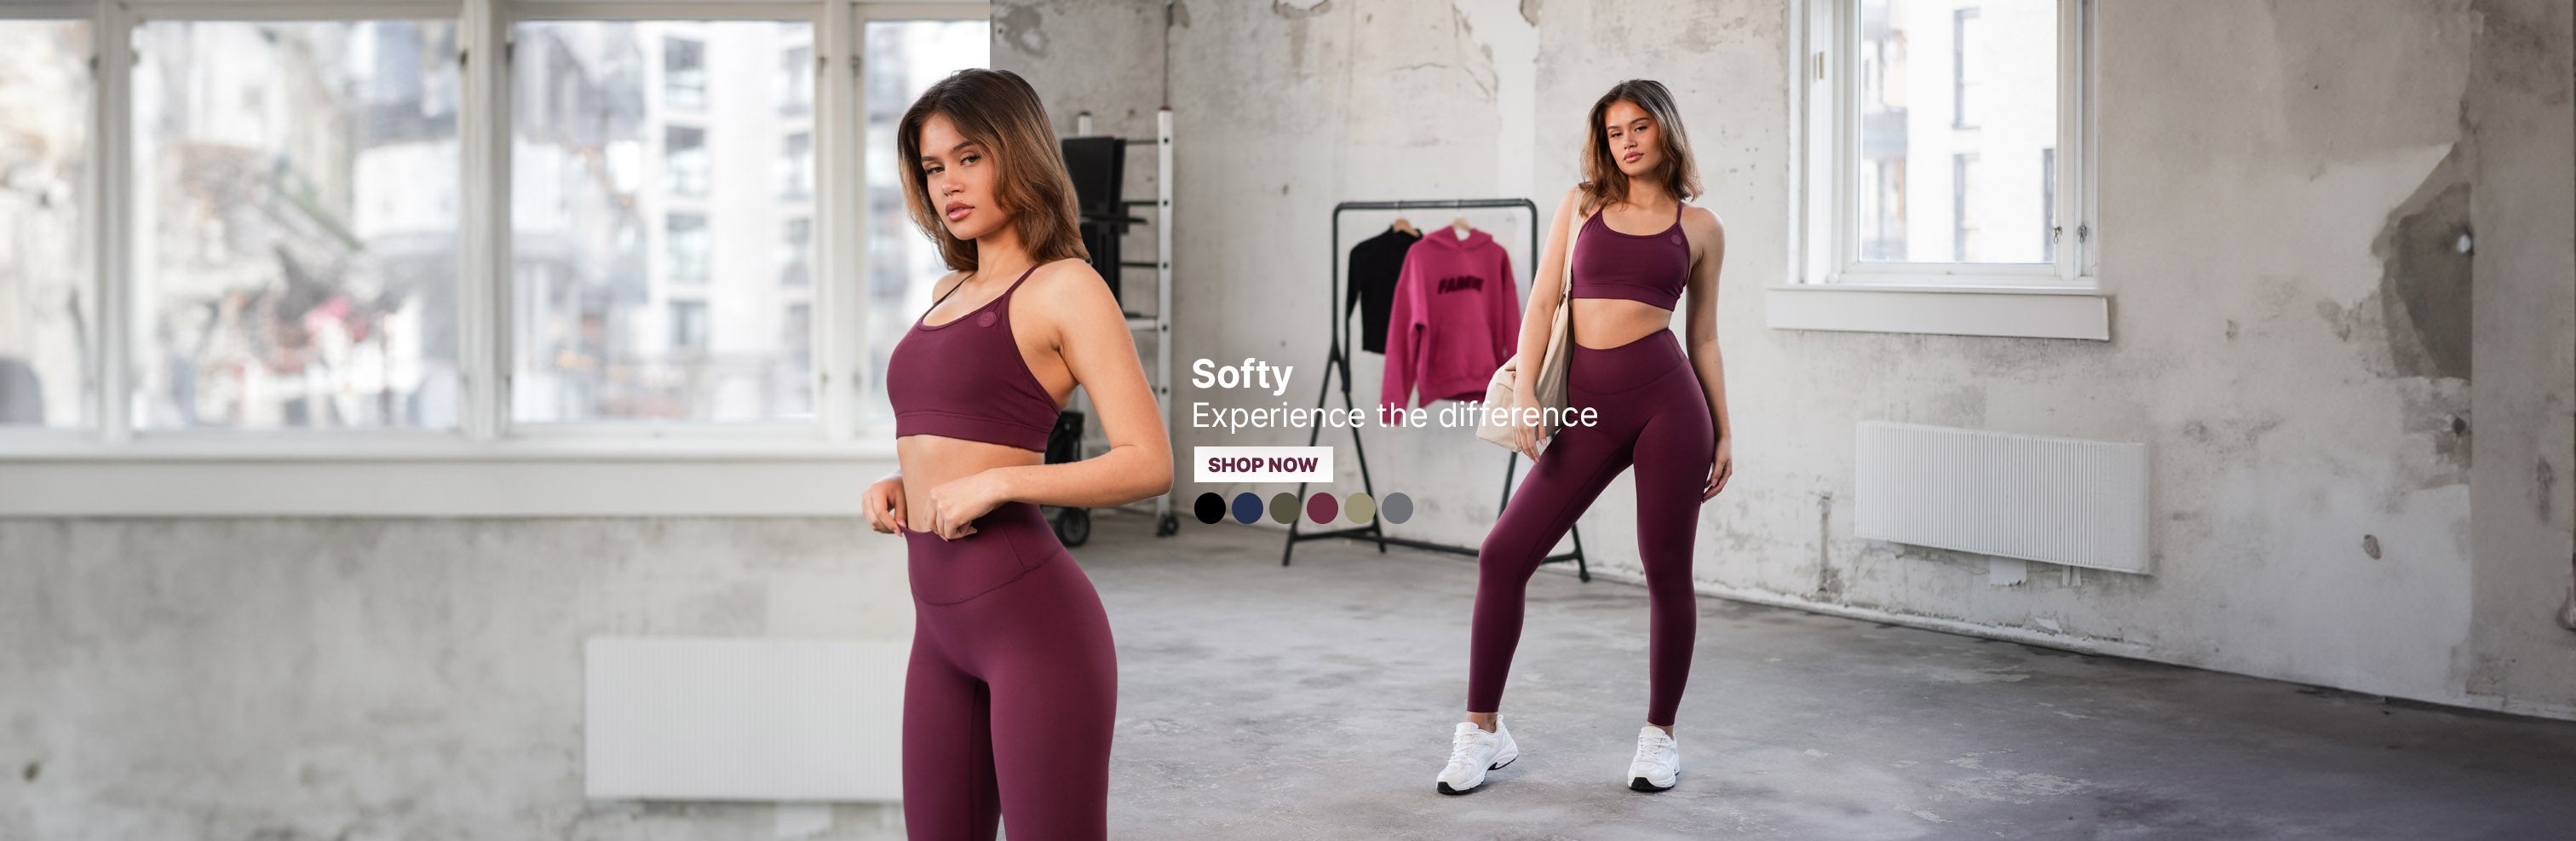 Ingor Sportswear Private Label Athletic Apparel Whoelsale Women Sports Gym  Outfits Active Wear Workout Fitness Clothing Yoga Leggings Pants - China  Pants and Clothing price